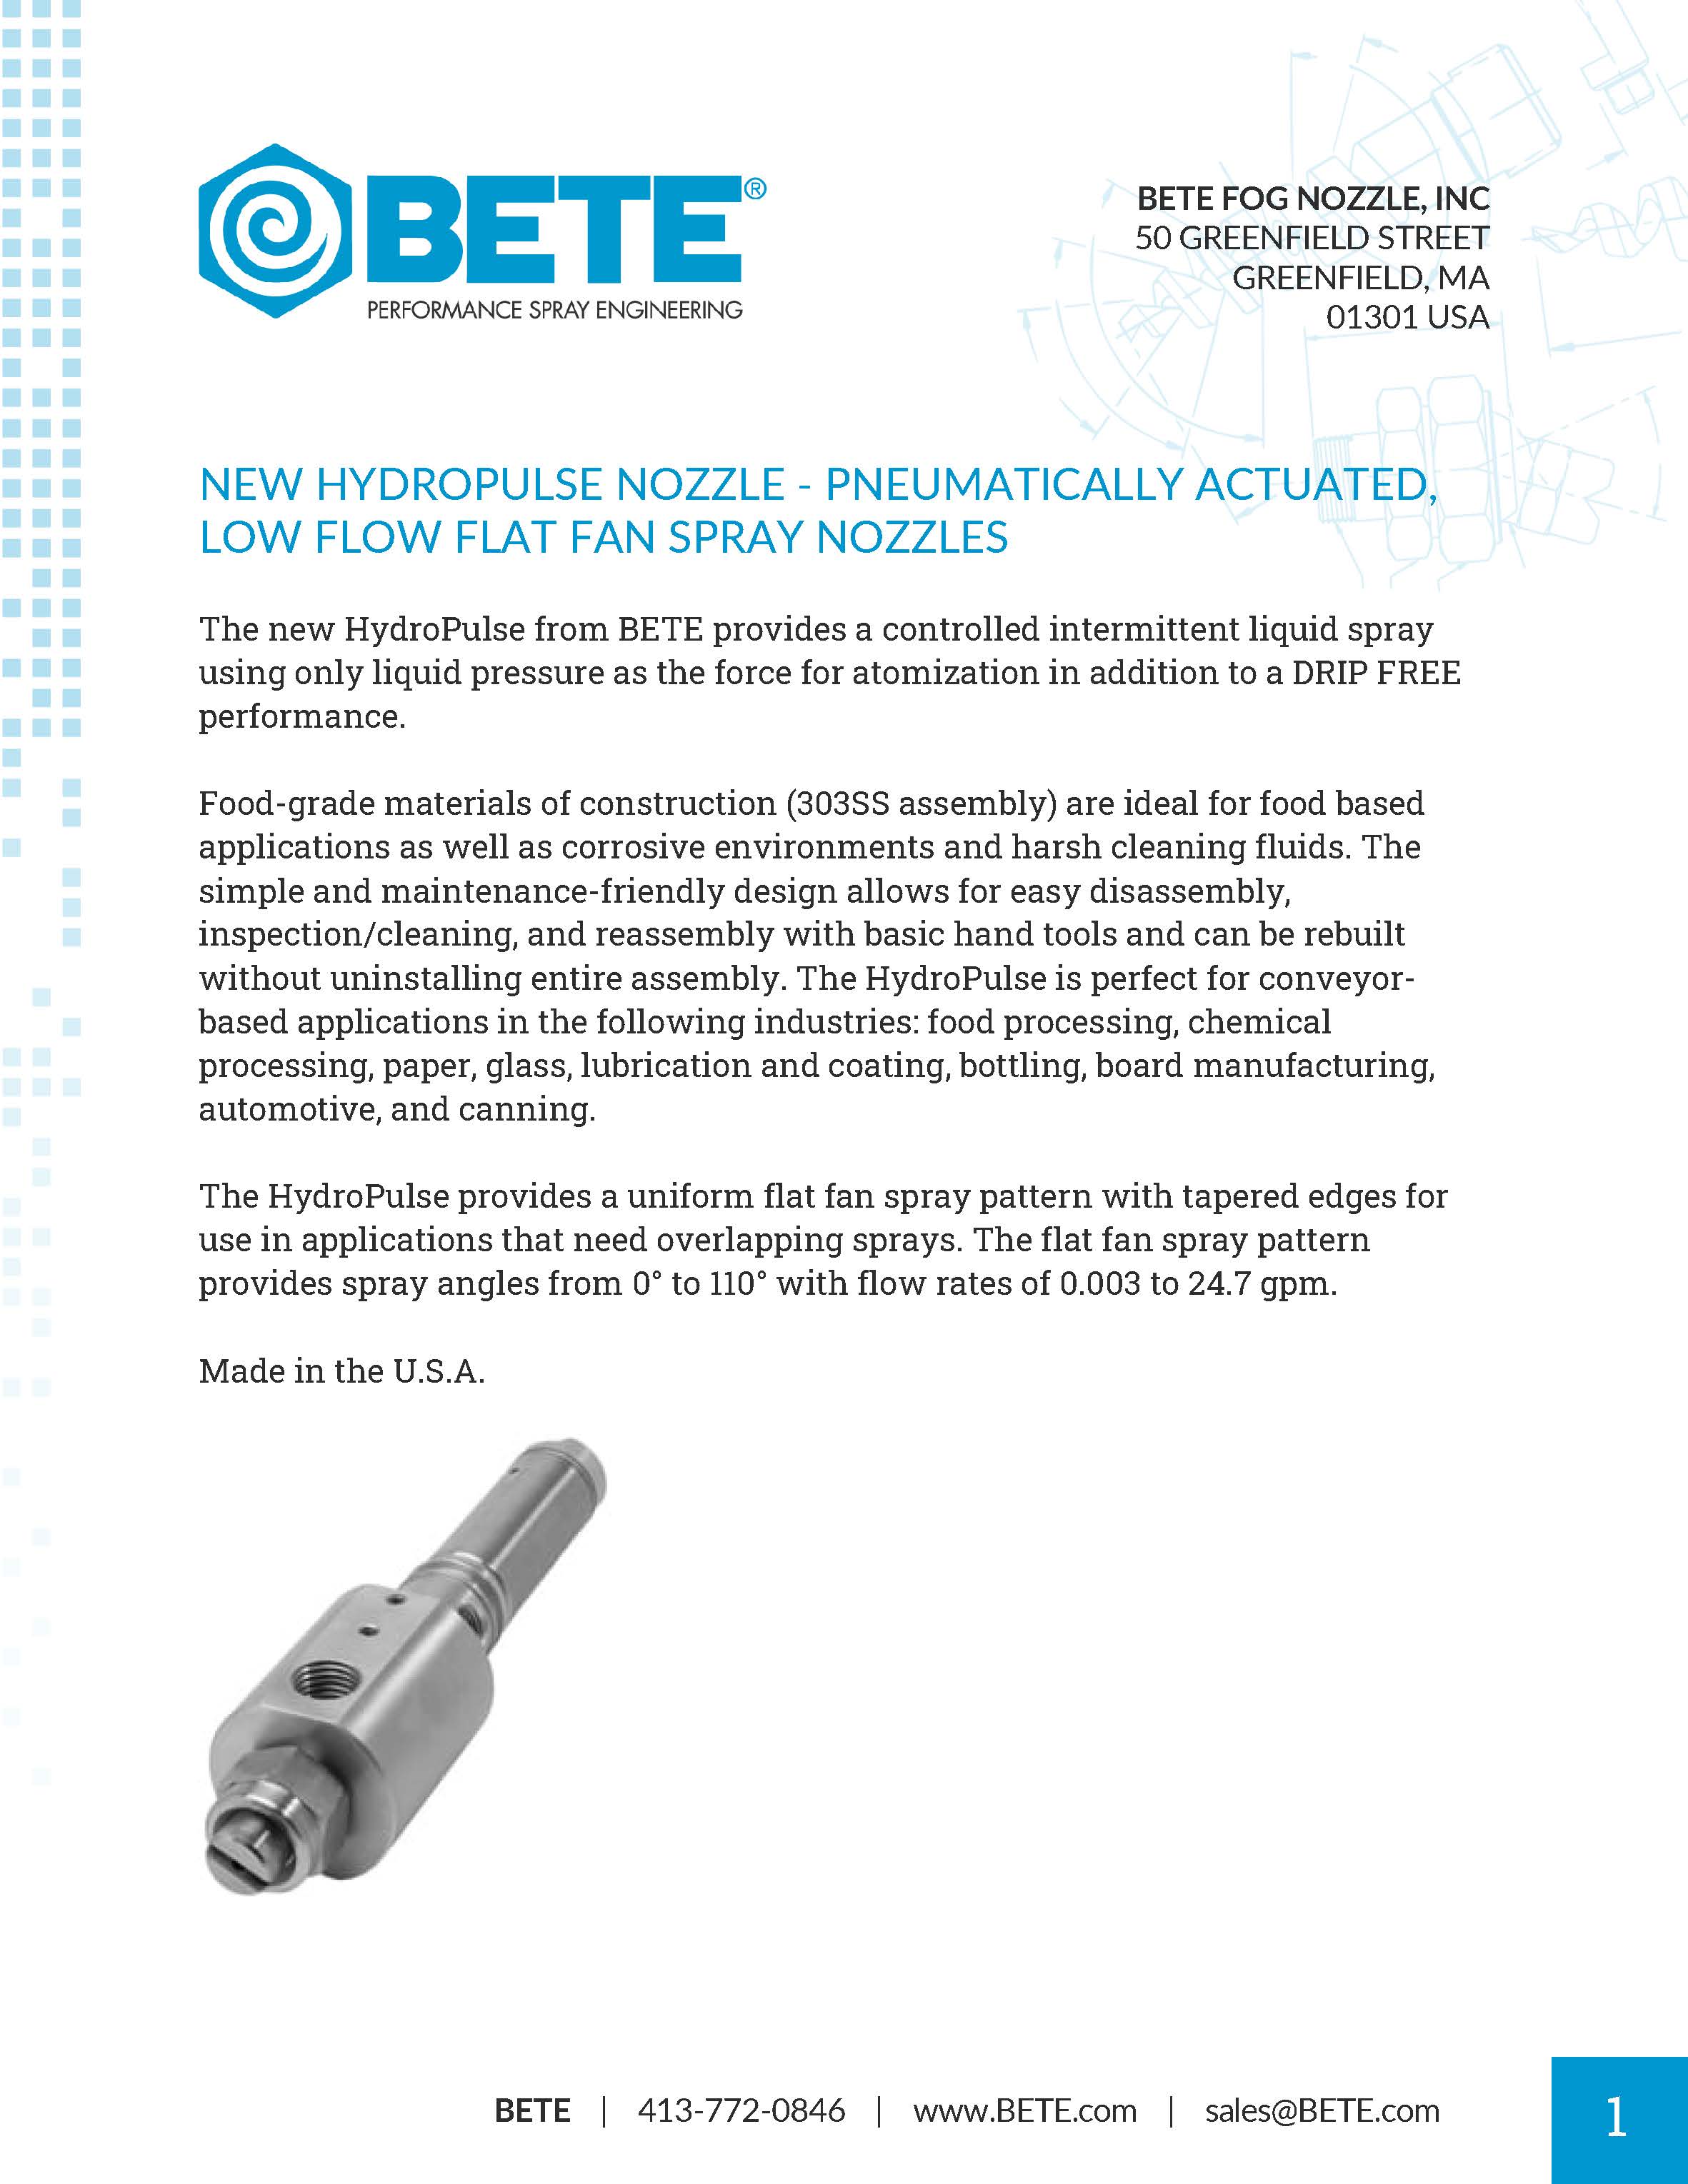 BETE HydroPulse Pneumatically Actuated Low Flow, Medium Angle, Flat Fan Spray Nozzles